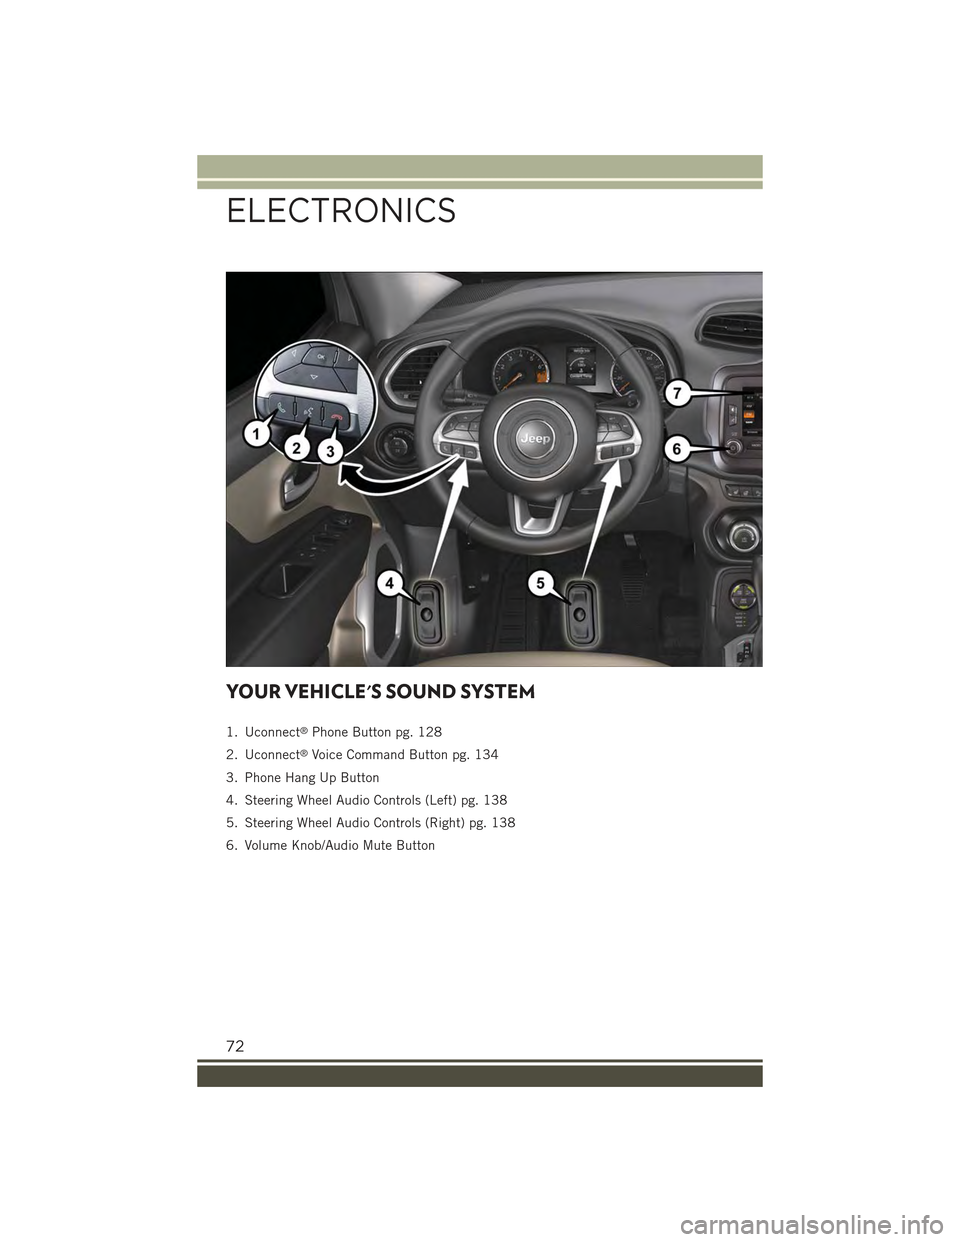 JEEP RENEGADE 2015 1.G User Guide YOUR VEHICLES SOUND SYSTEM
1. Uconnect®Phone Button pg. 128
2. Uconnect®Voice Command Button pg. 134
3. Phone Hang Up Button
4. Steering Wheel Audio Controls (Left) pg. 138
5. Steering Wheel Audio 